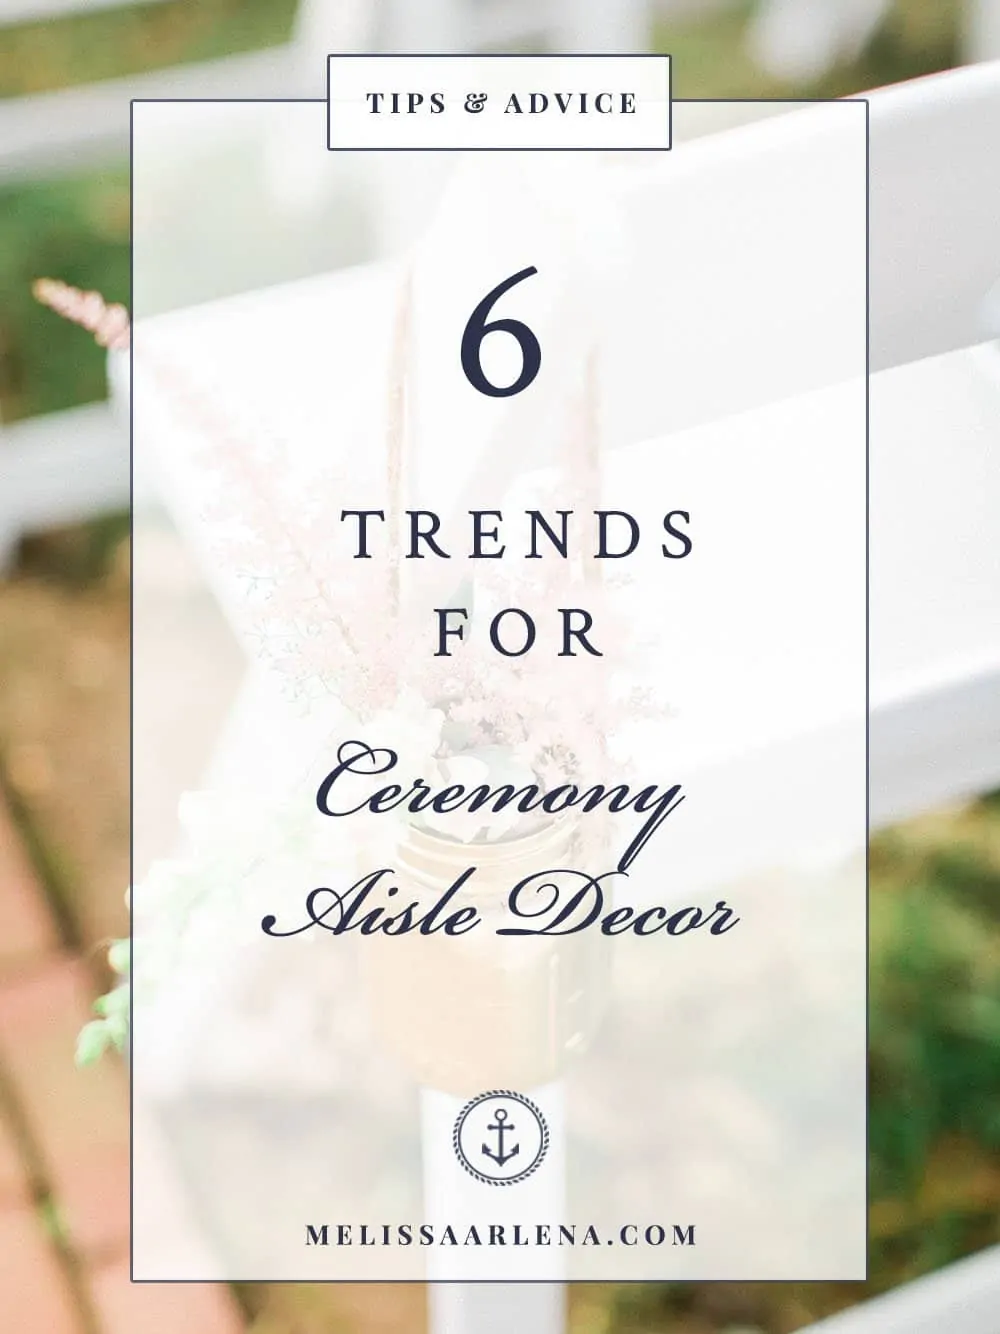 6 Trends for Ceremony Aisle Décor in 2018 by Melissa Arlena Photography